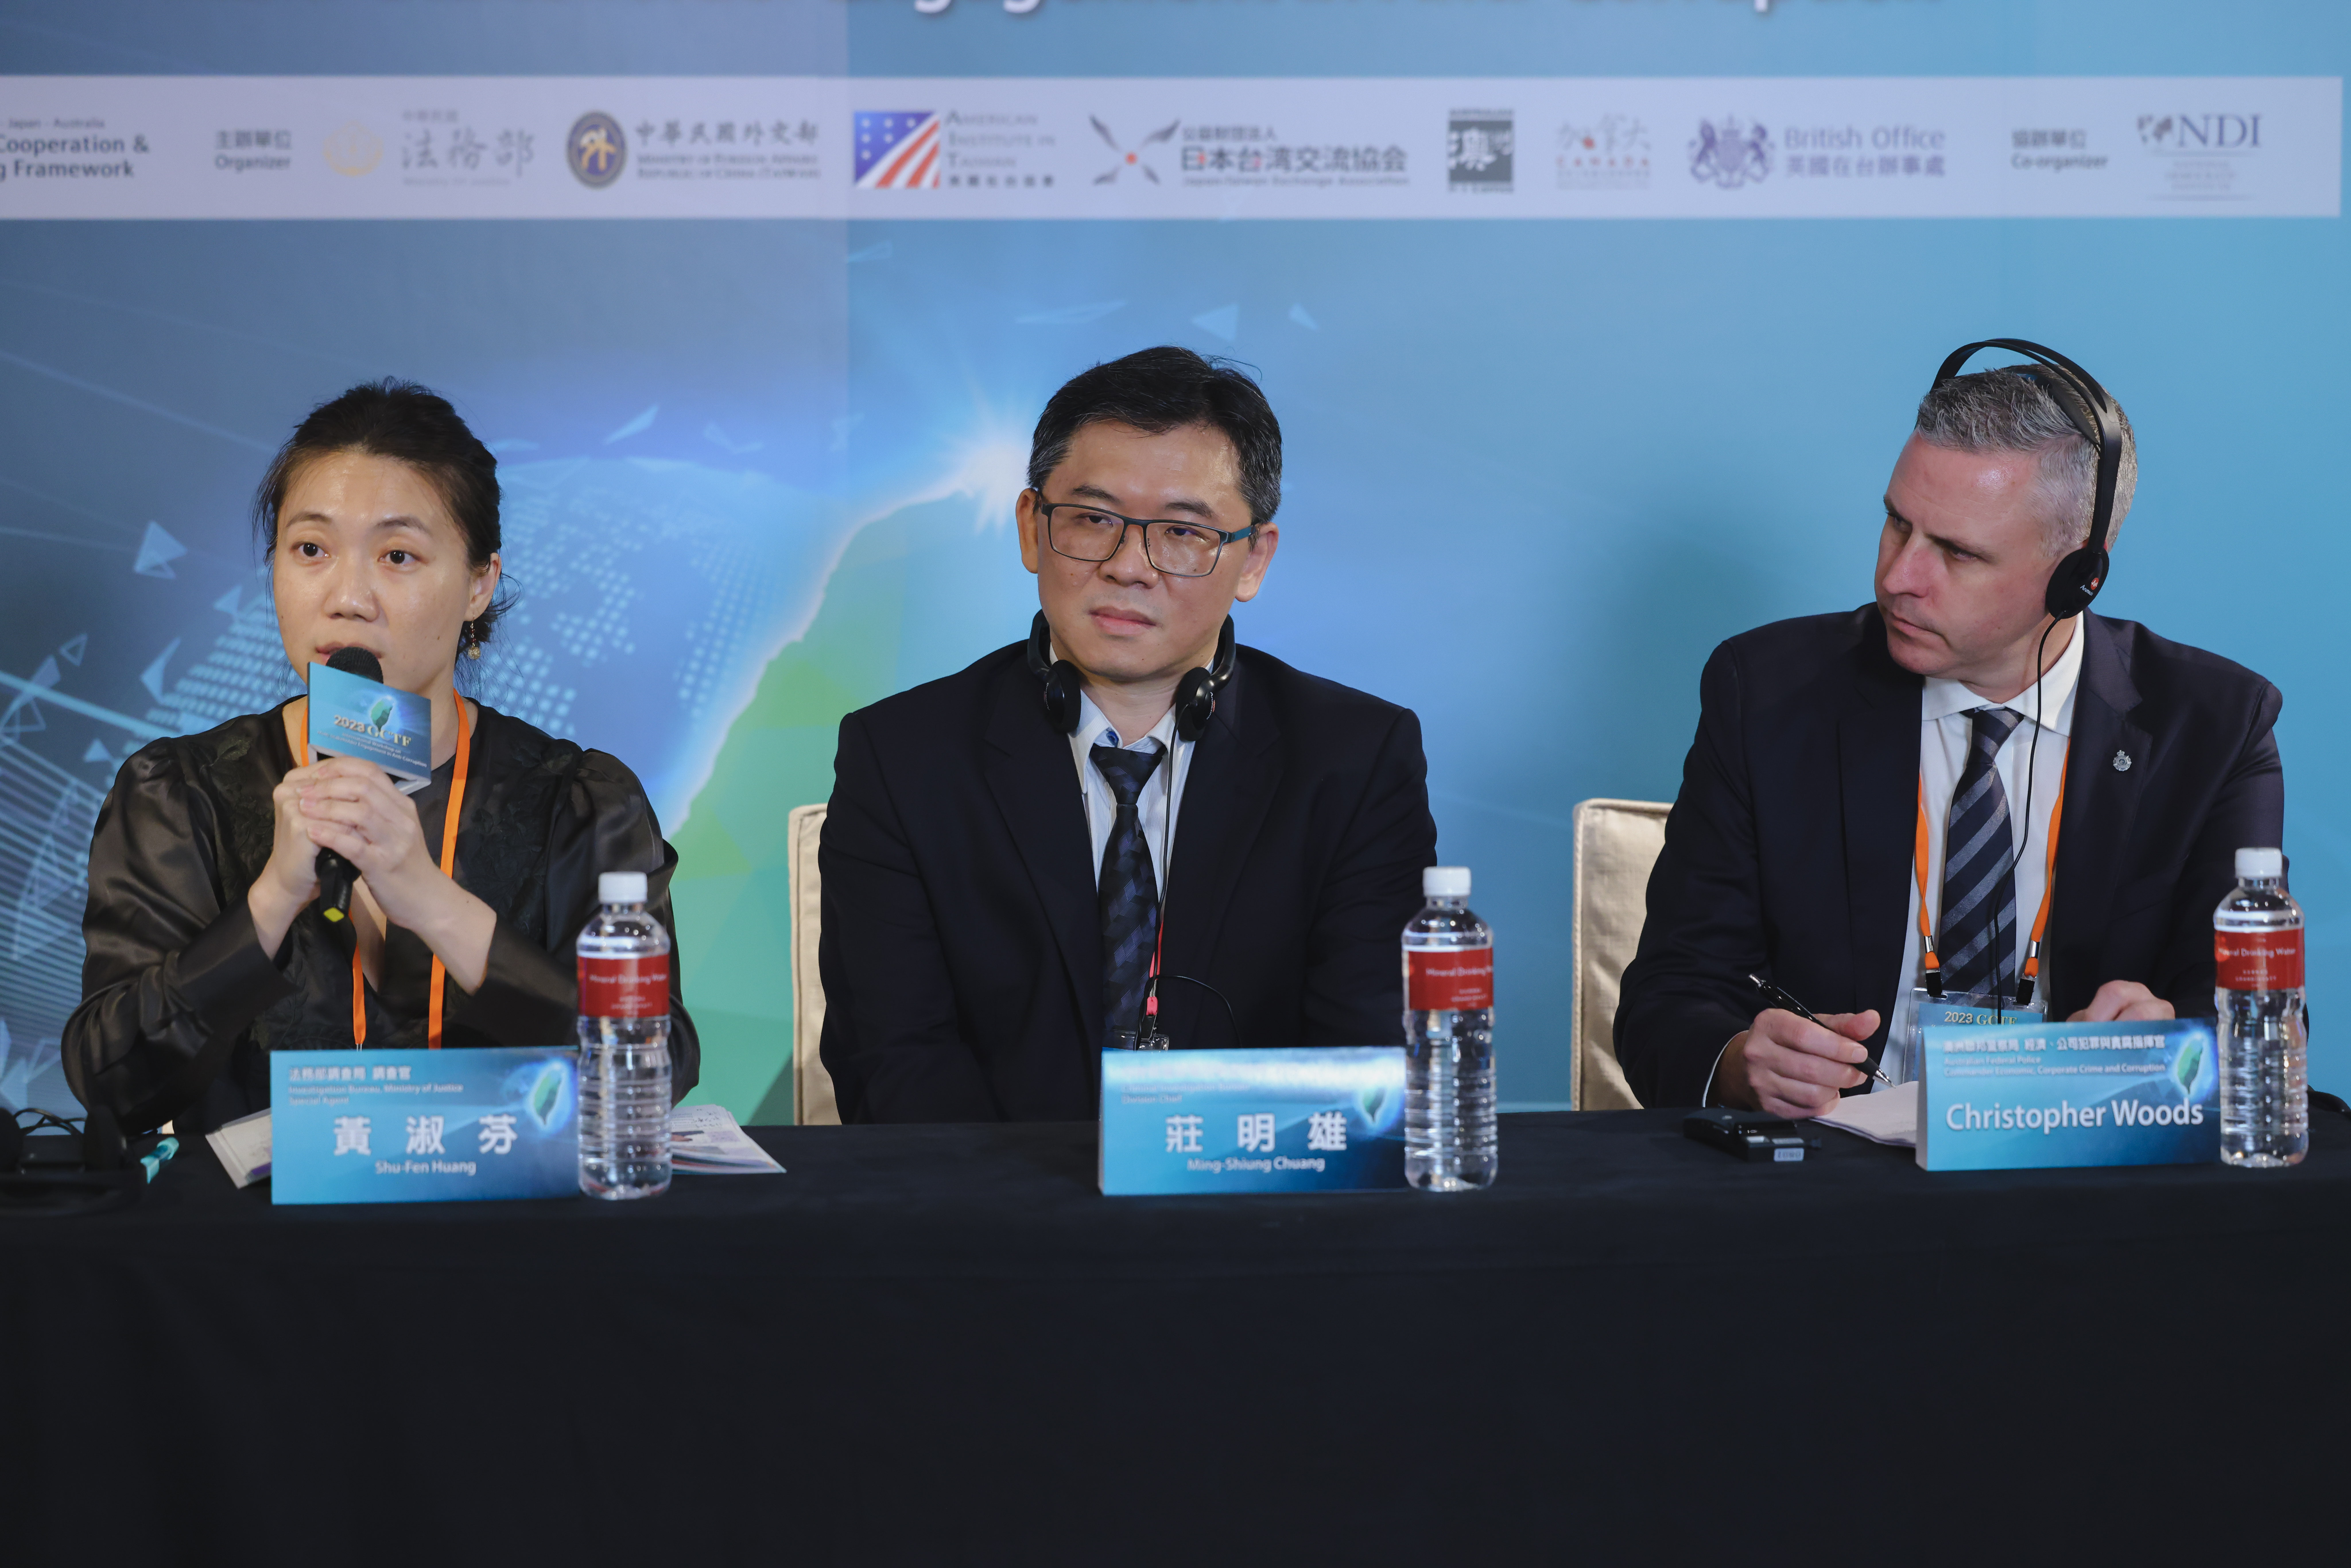 GCTF Session Four Workshop A (From Left to Right Shu-Fen Huang, Ming-Shiung Chuang, and Christopher Woods)